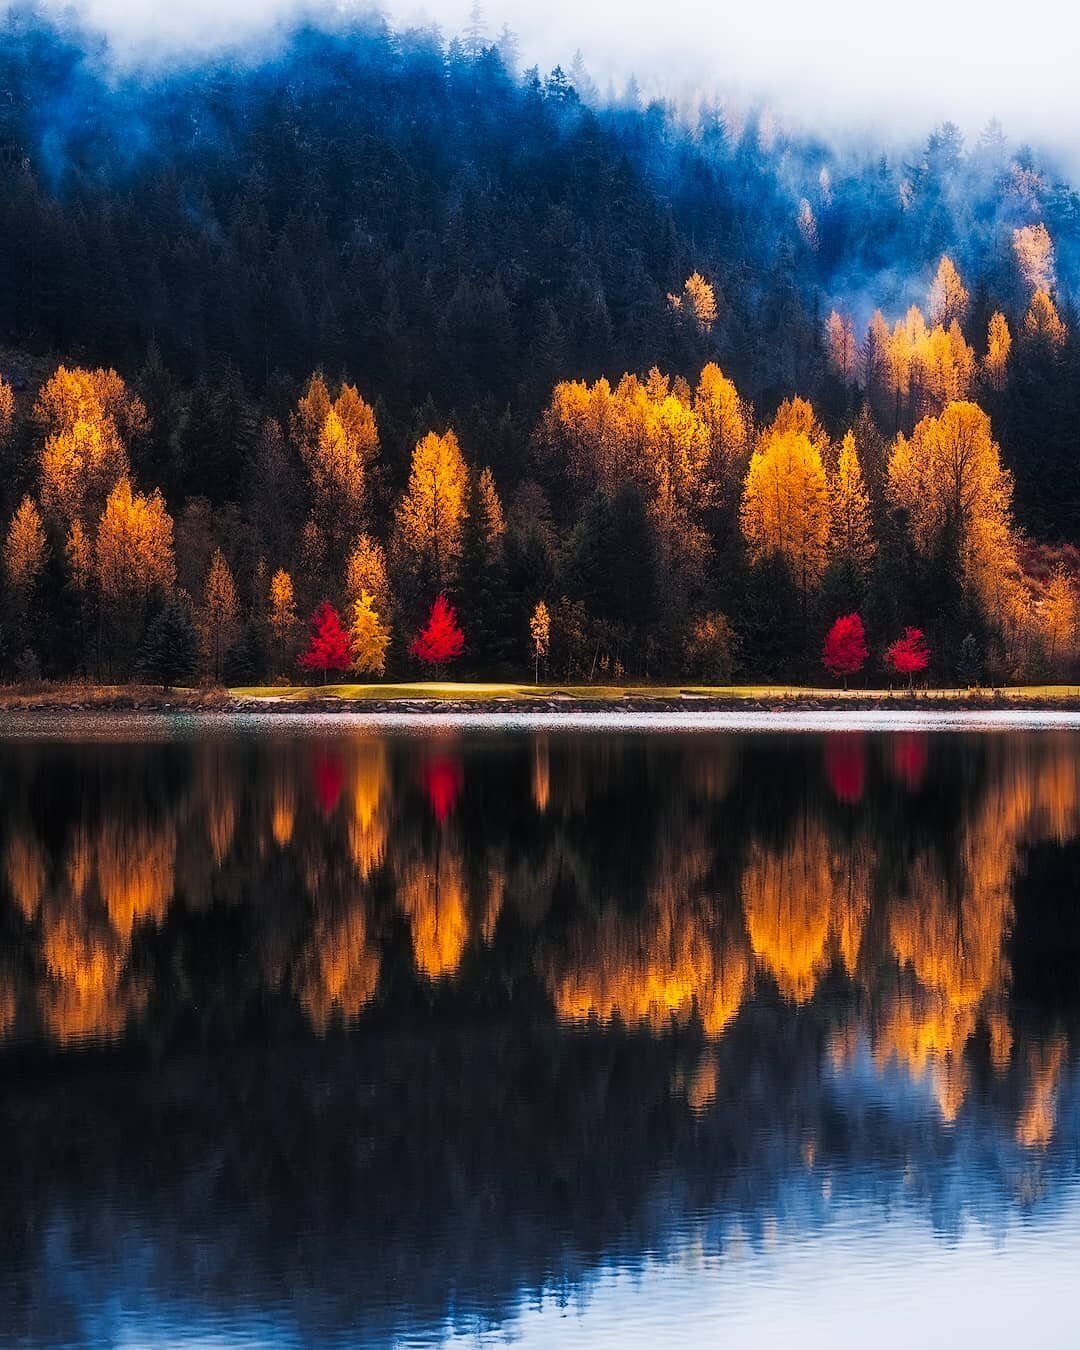 Fall reflections 🍂

During the next week I will be traveling north on the sea to sky, exploring the areas of Whistler and Pemberton, in search for new compositions with, hopefully, some fall colours in them :) 

Otherwise, I hope you all get to enjo